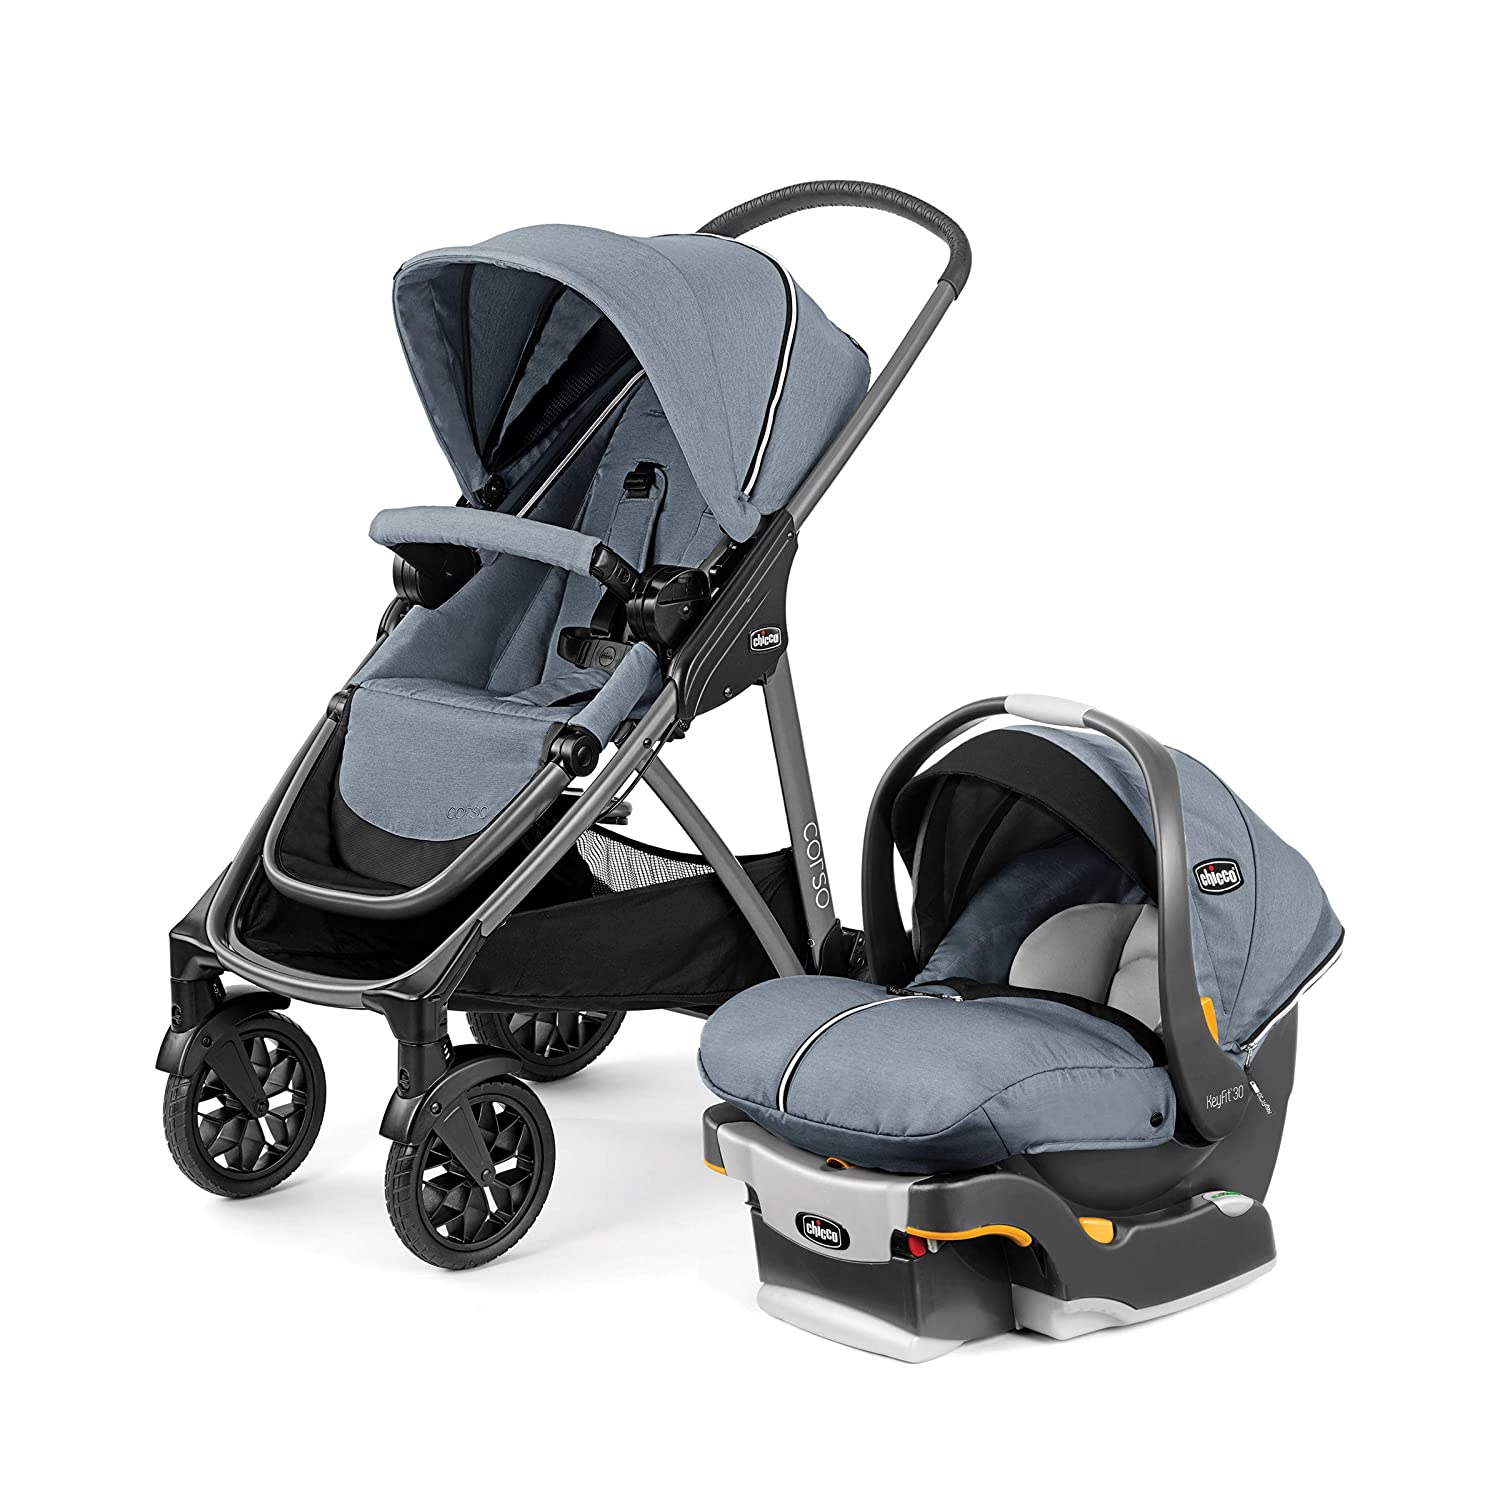 Chicco Corso Le Modular Travel System Stroller and Car Seat